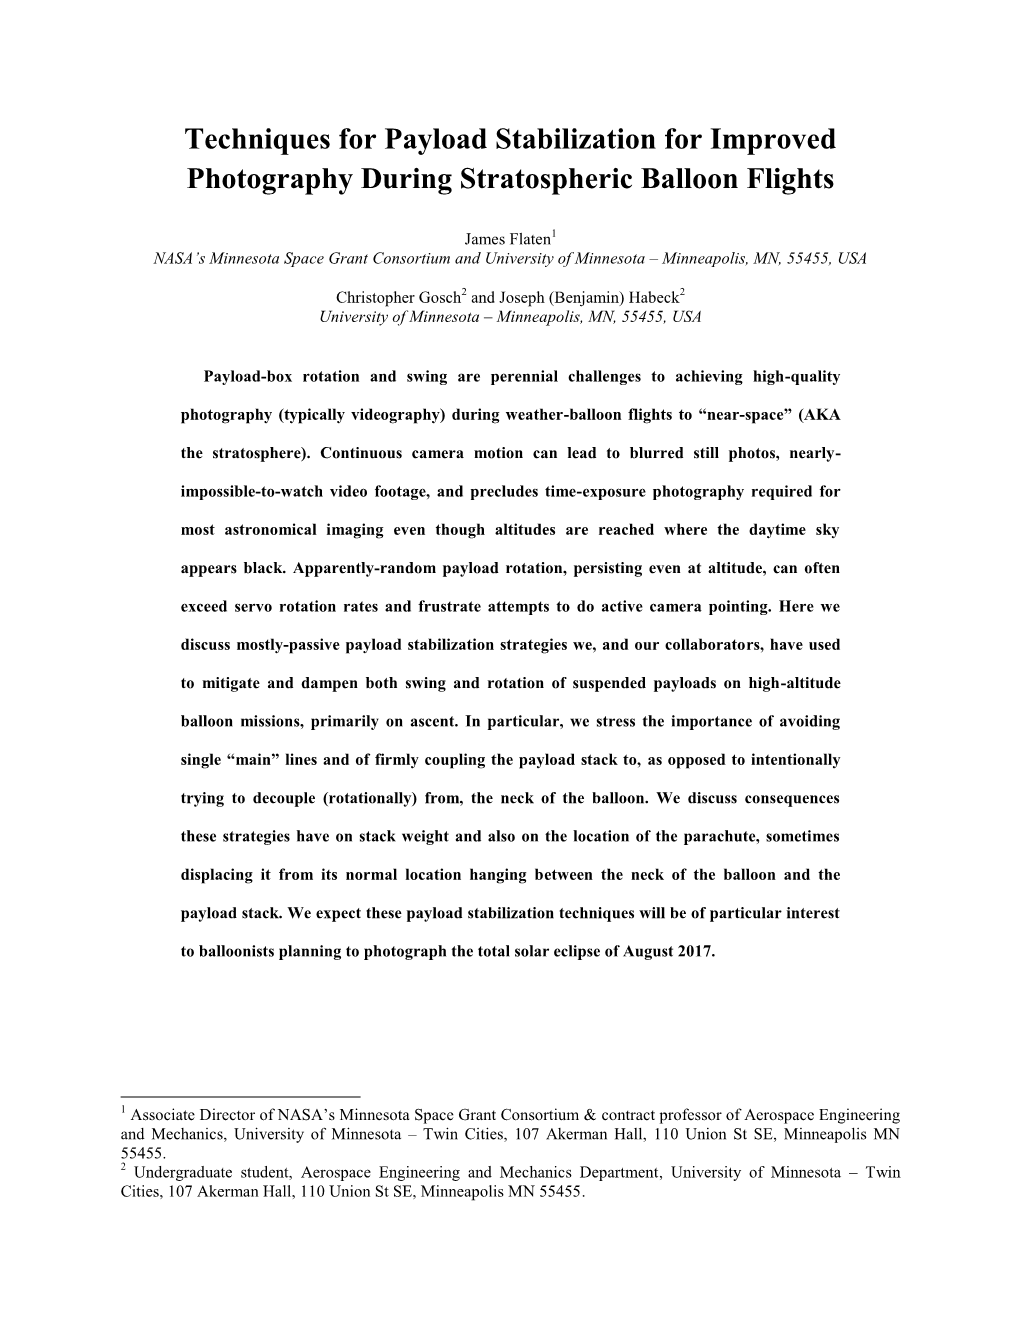 Techniques for Payload Stabilization for Improved Photography During Stratospheric Balloon Flights